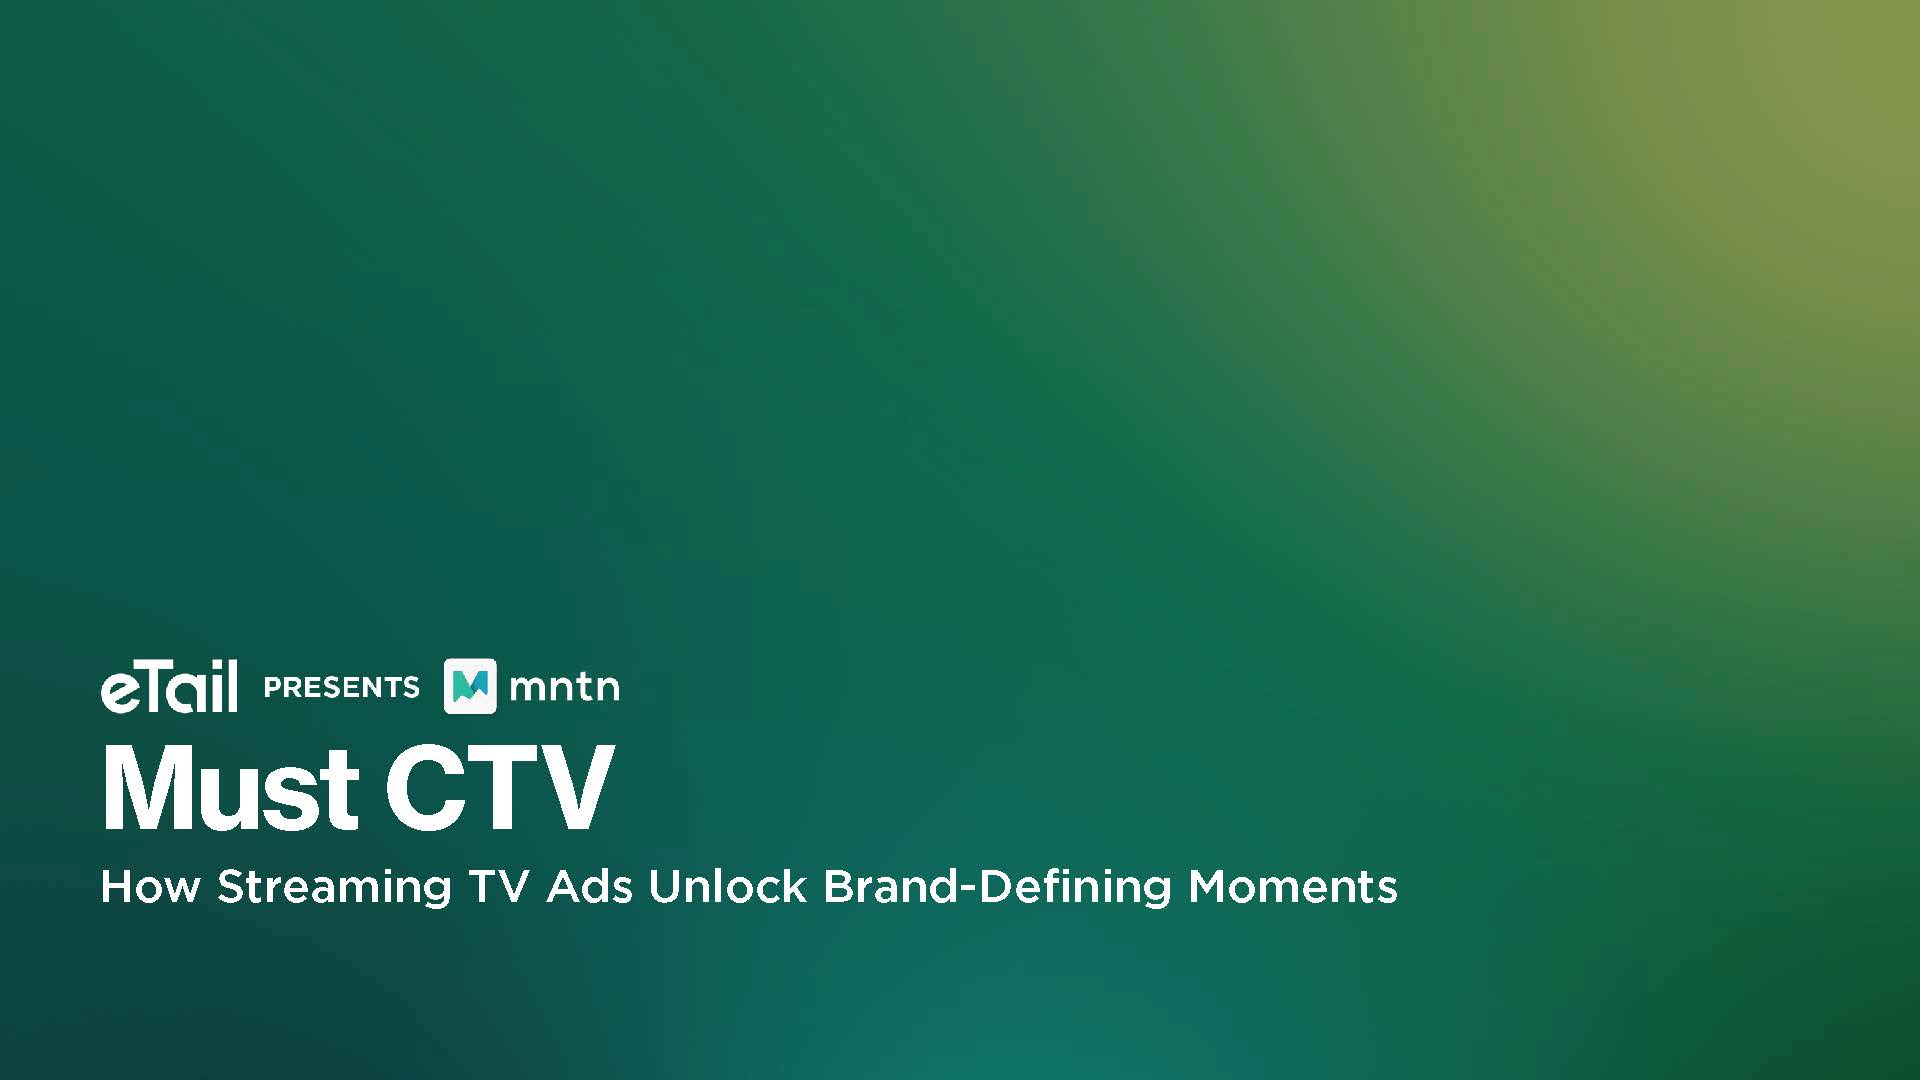 Must CTV: How Streaming TV Ads Unlock Brand-Defining Moments